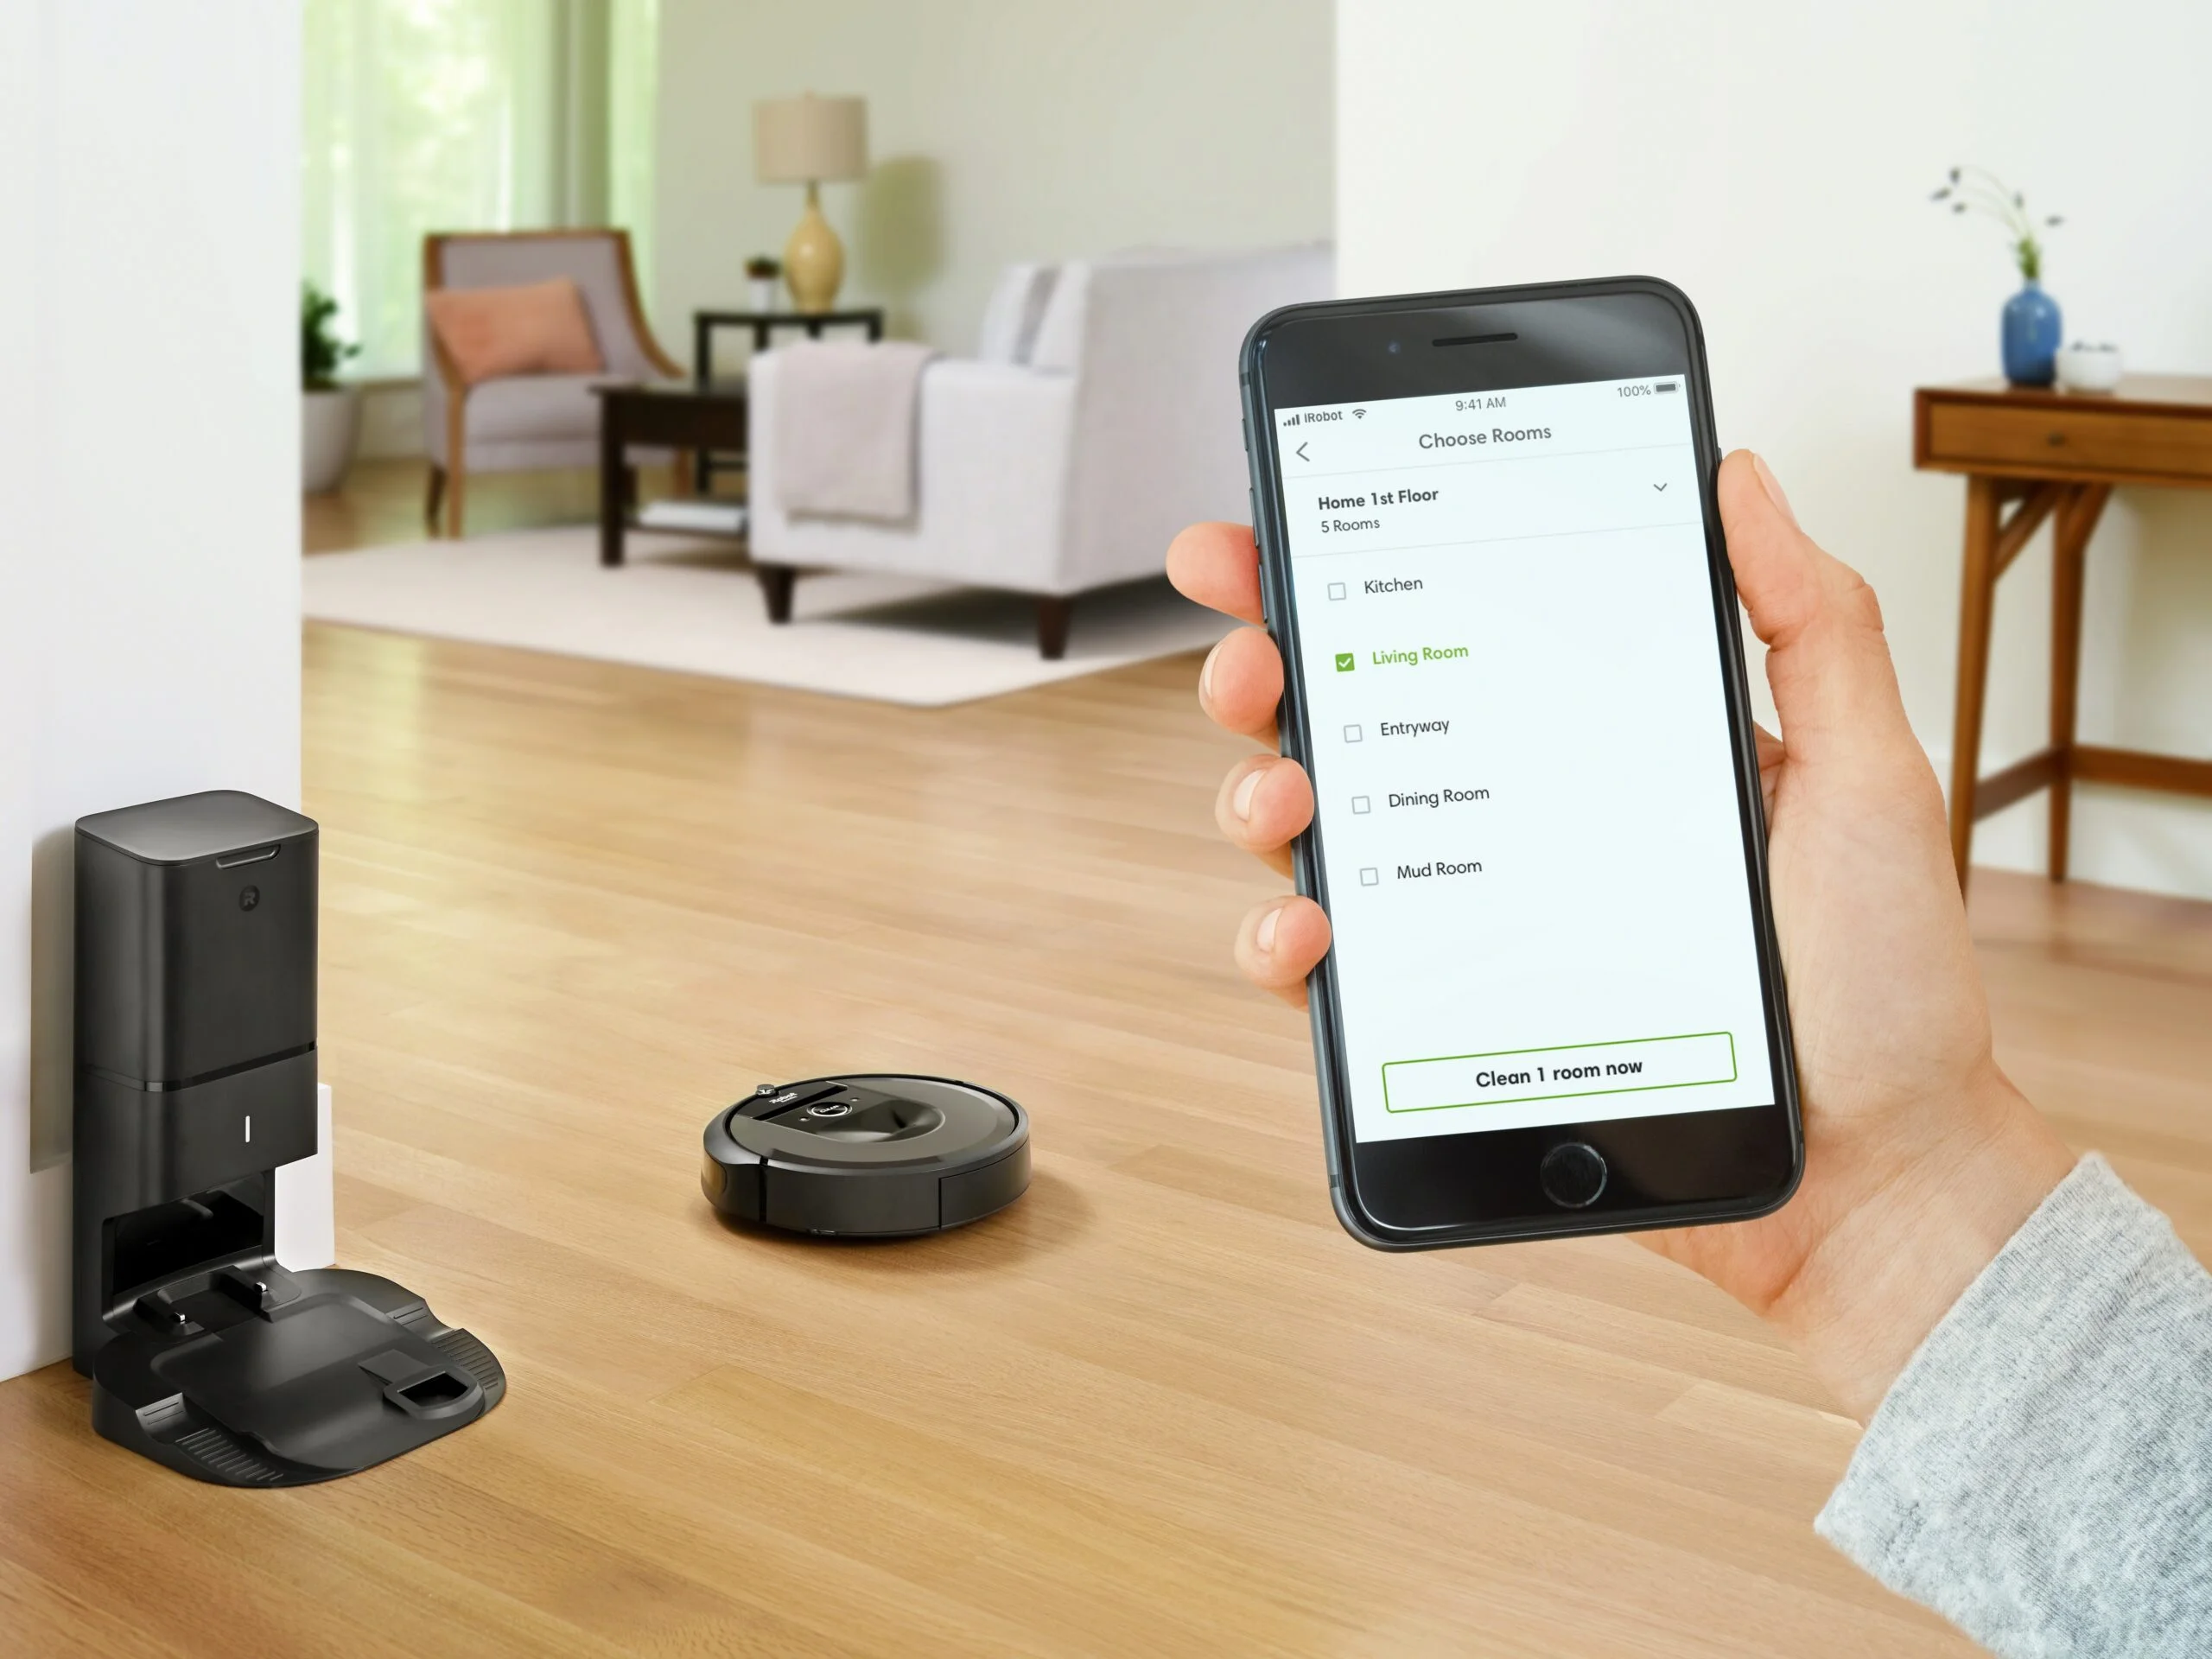 How to Get Roomba to Clean Whole House